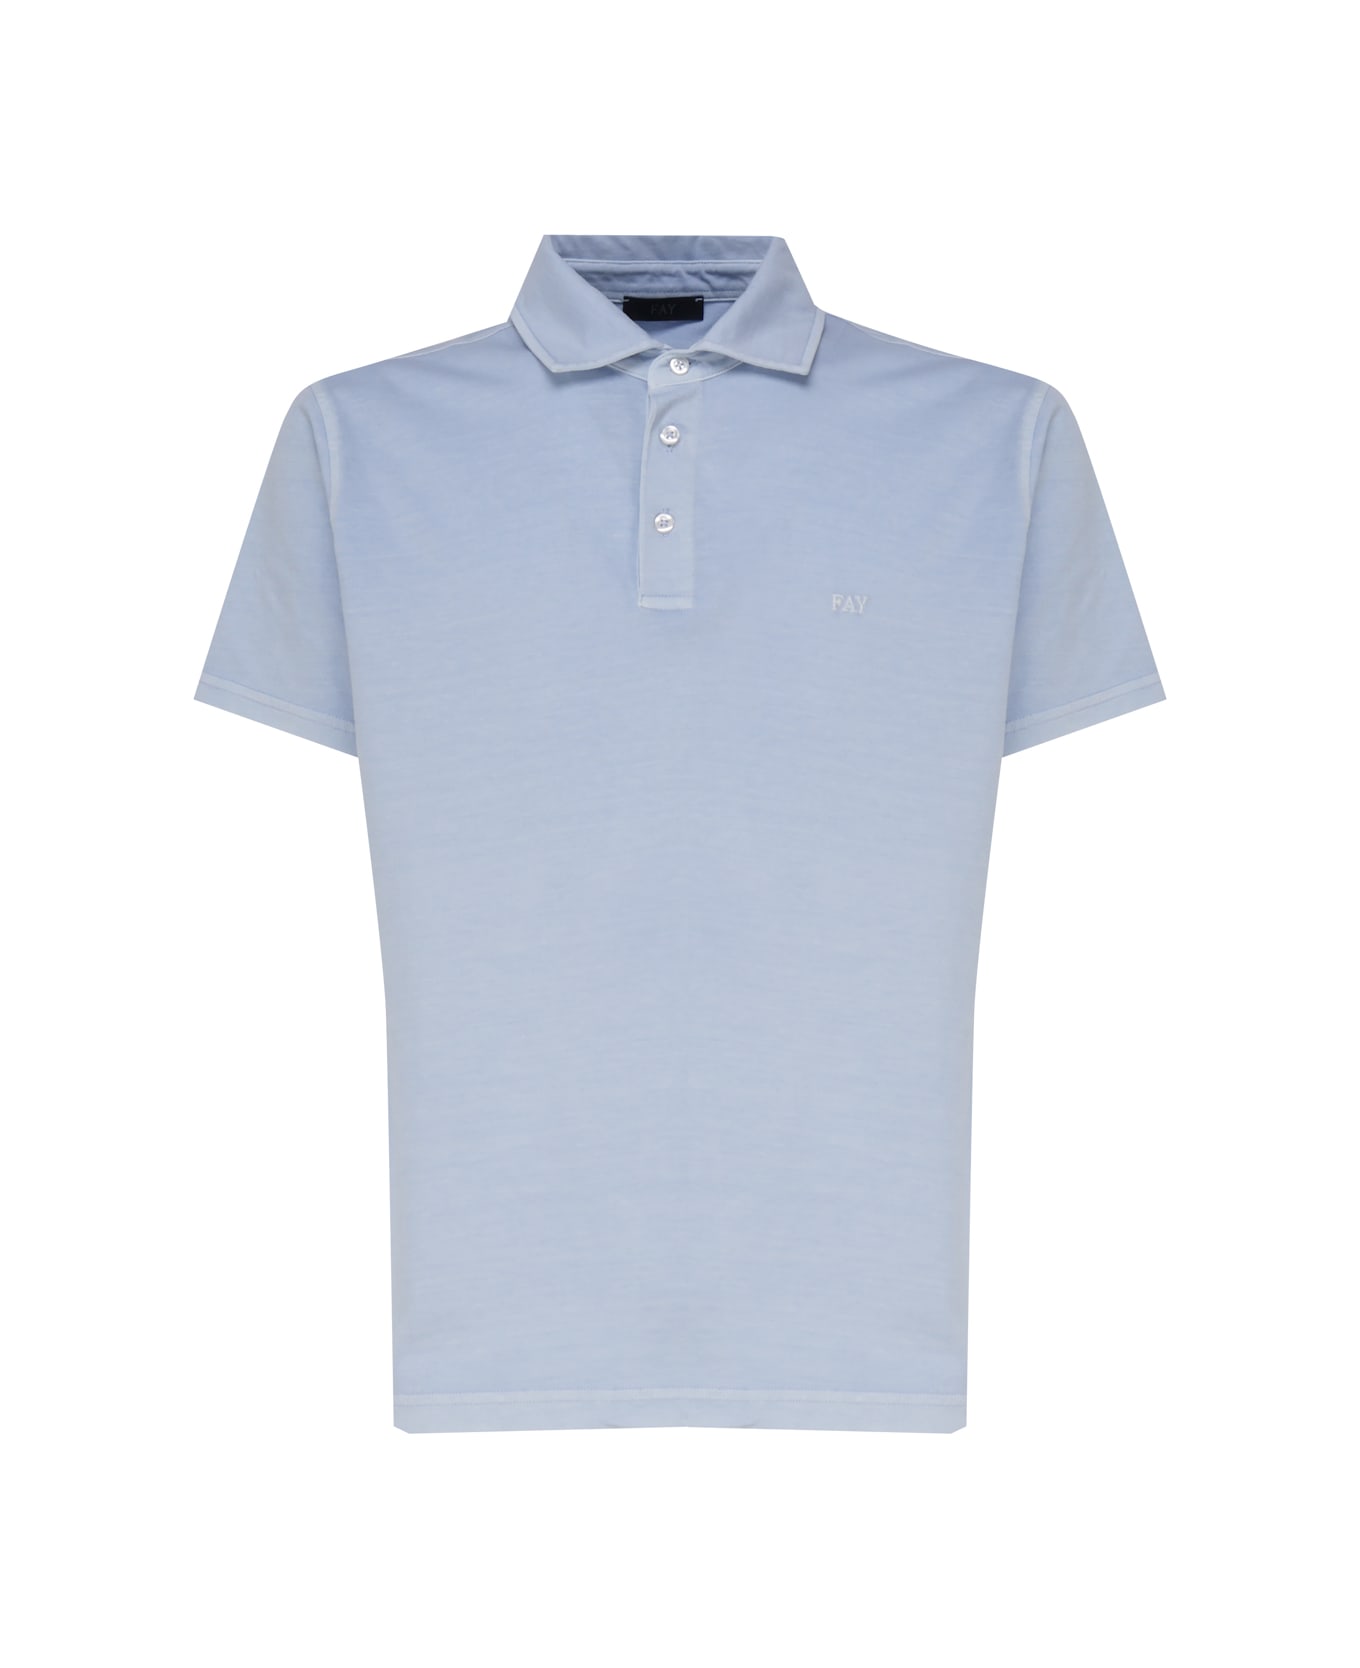 Fay Polo T-shirt In Cotton - Light blue ポロシャツ